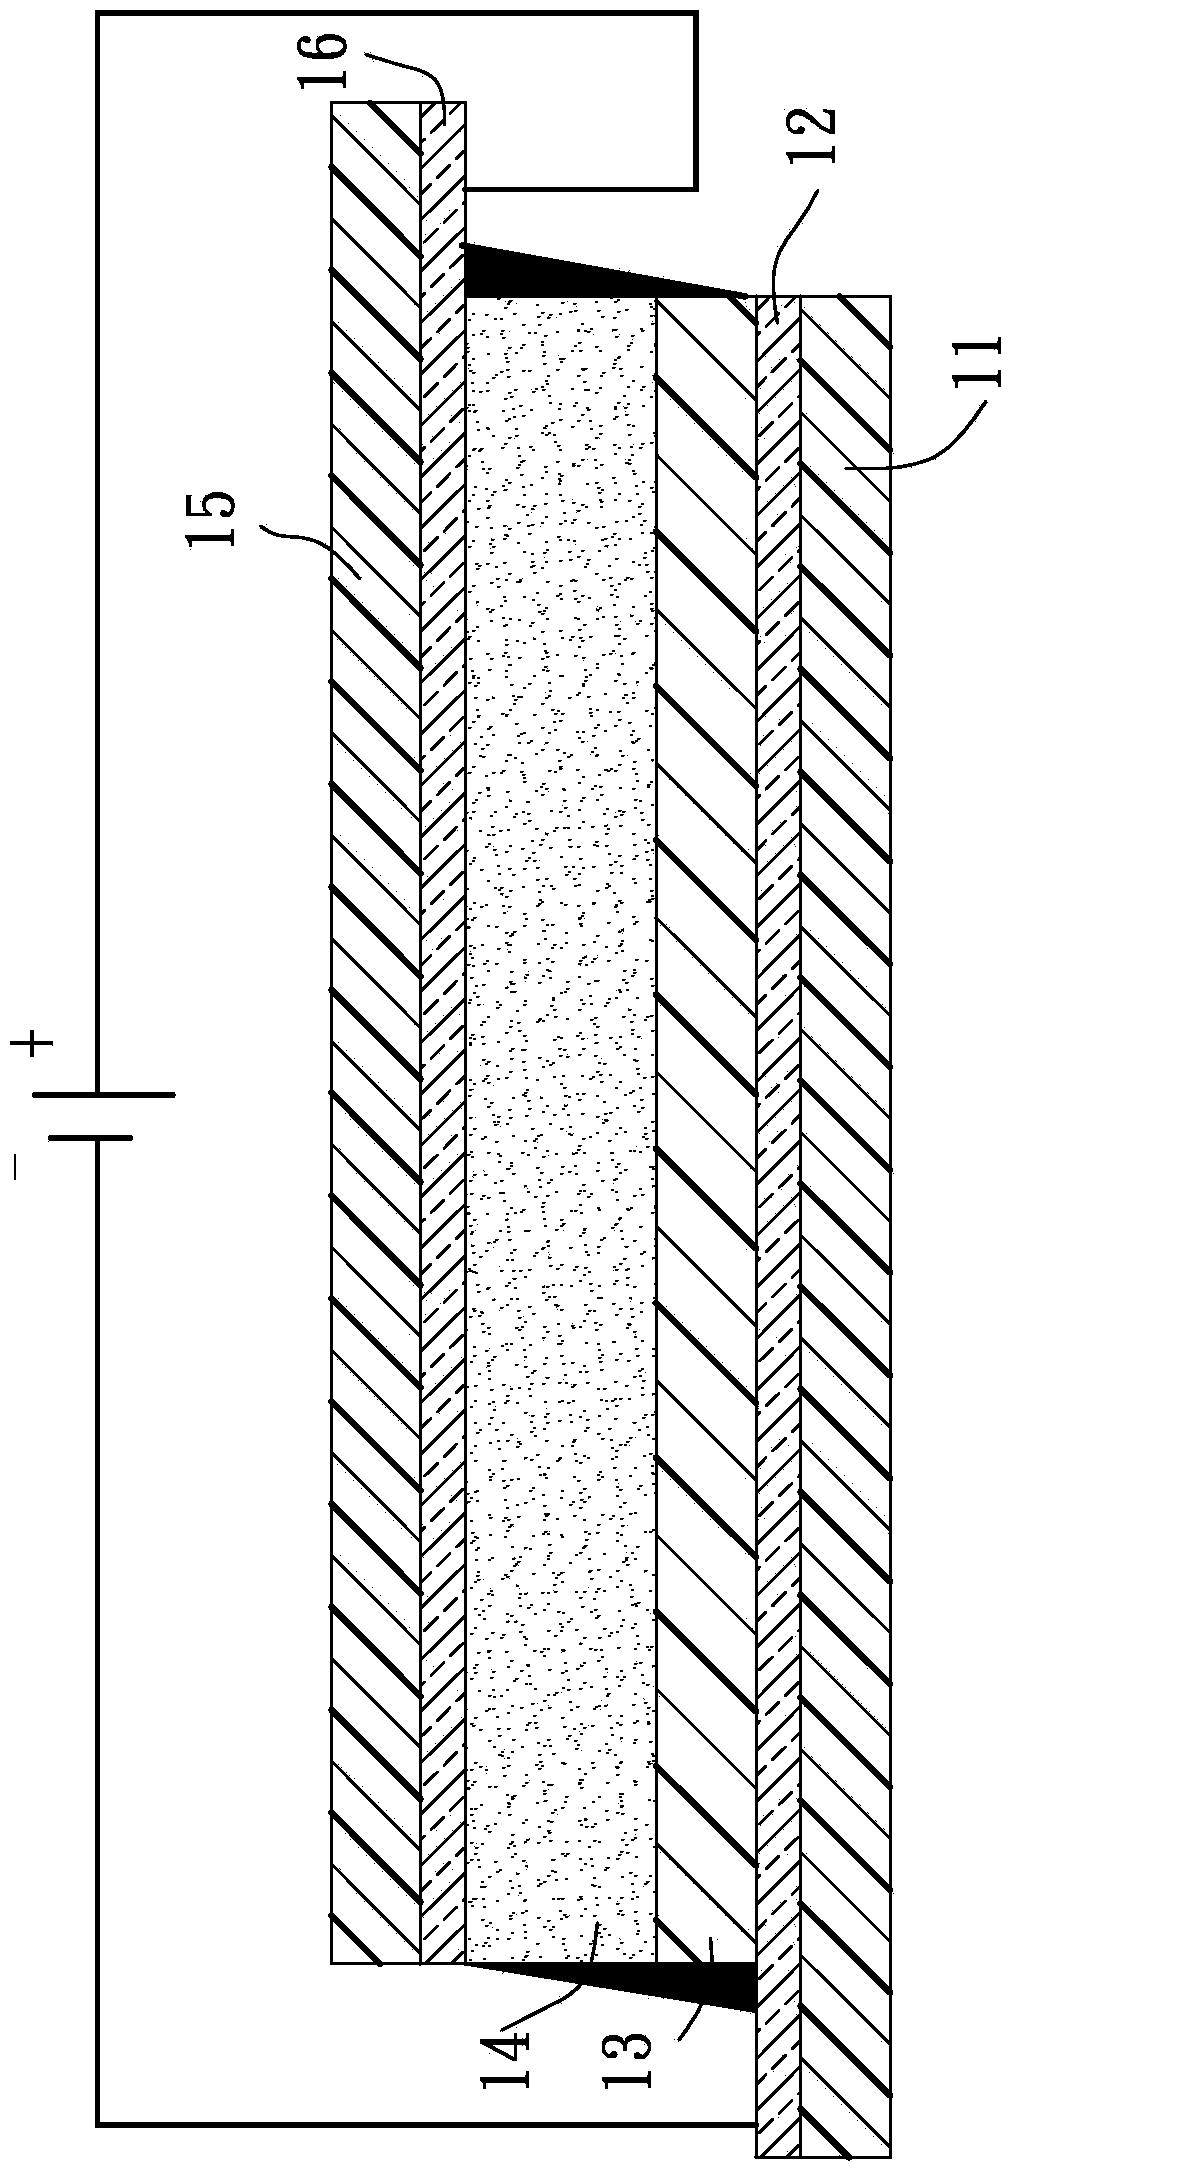 Electrochromic device including metal lines